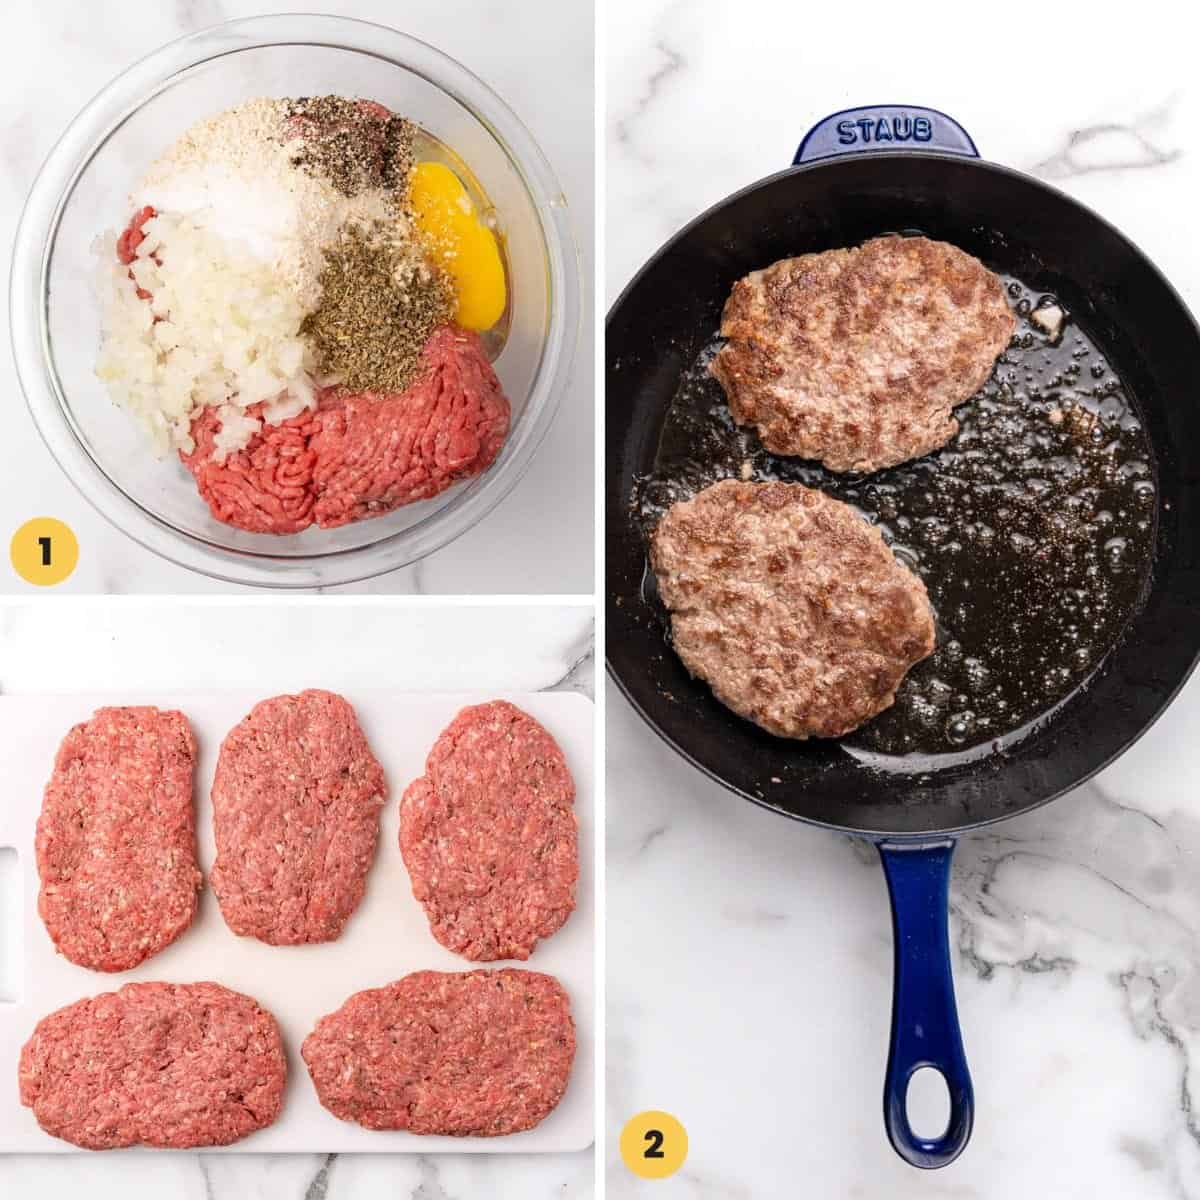 Collage of 3 images showing how to make hamburger steaks, shaping them and searing.